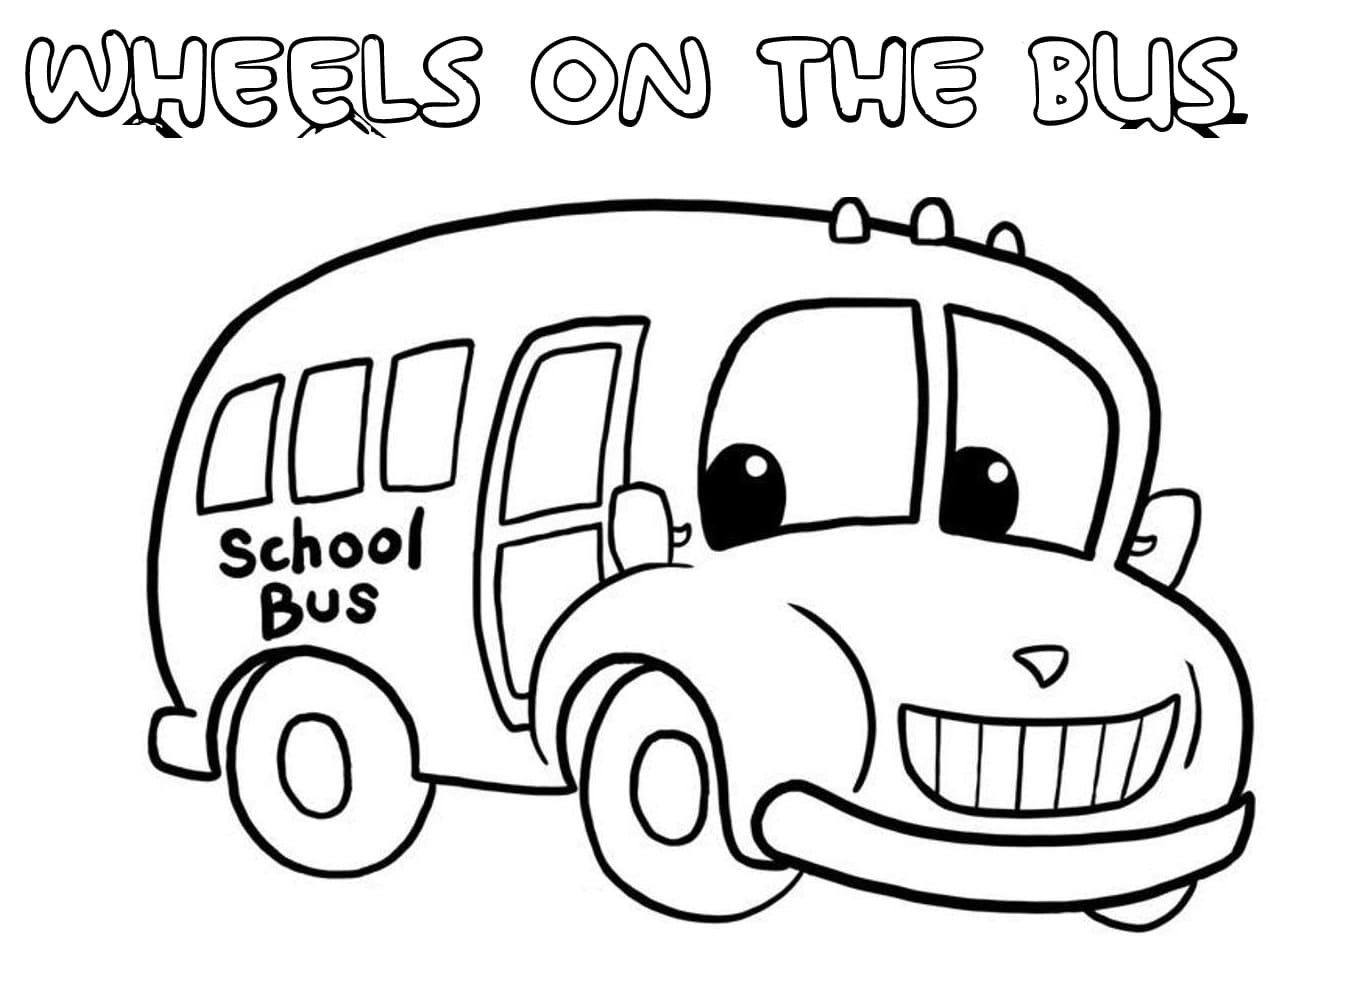 The wheel on the bus image coloring page